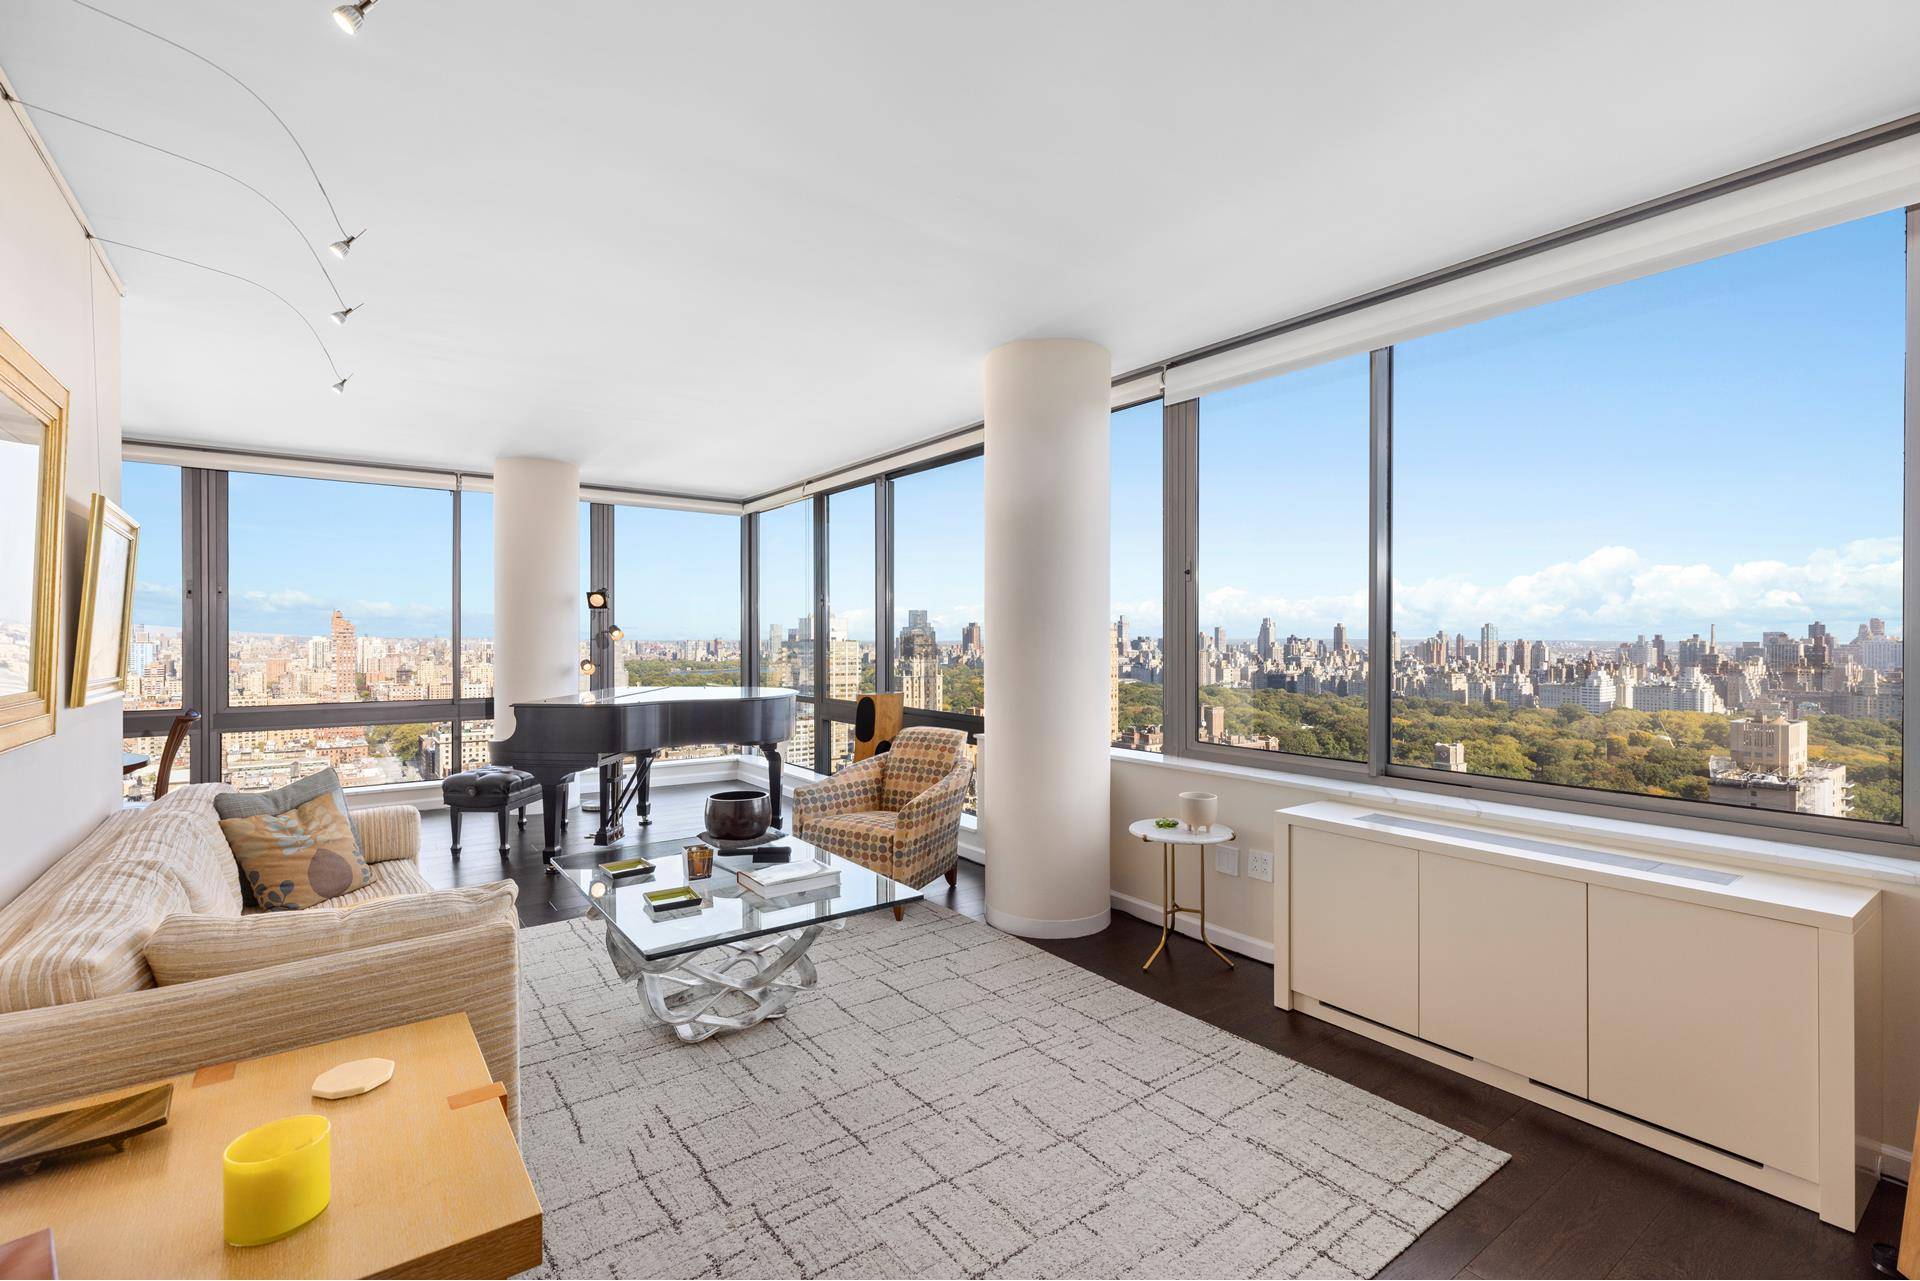 Unit 38E at 111 West 67th Street is truly a must see apartment.